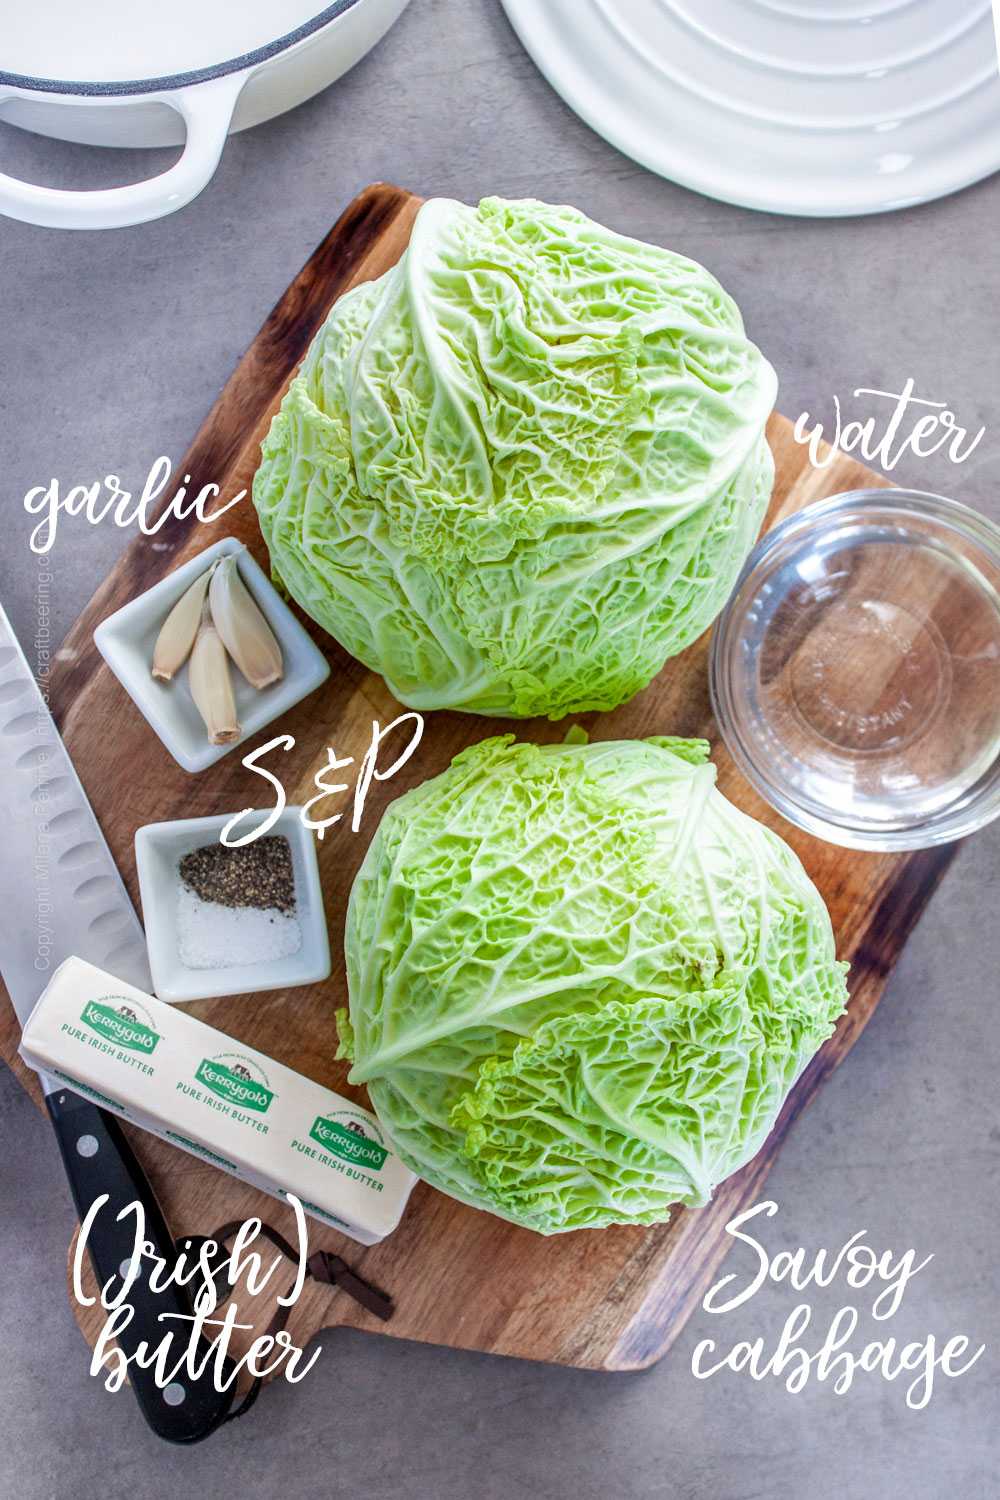 Savoy cabbage, butter, garlic, salt and pepper and water - ingredients for buttered cabbage.